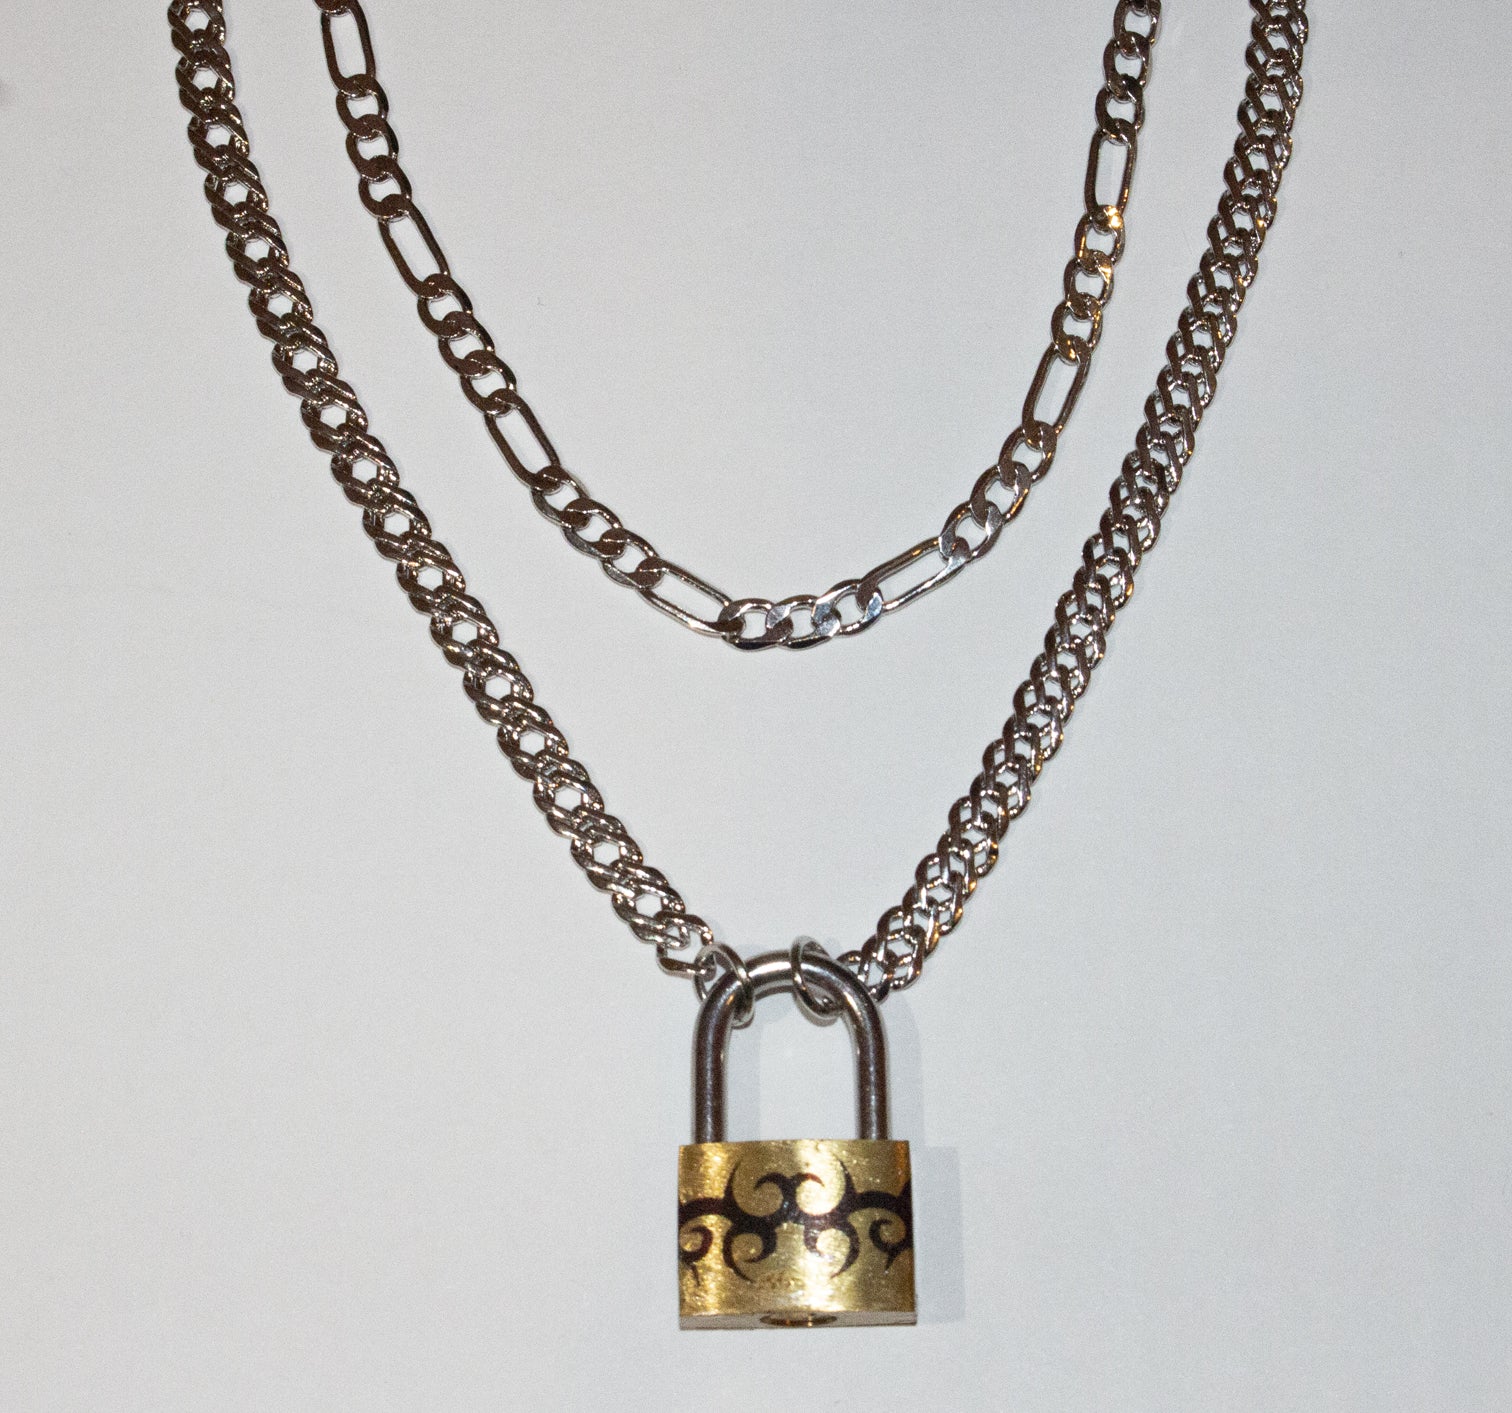 Louis Vuitton Padlock Necklace with Double Chain For Him